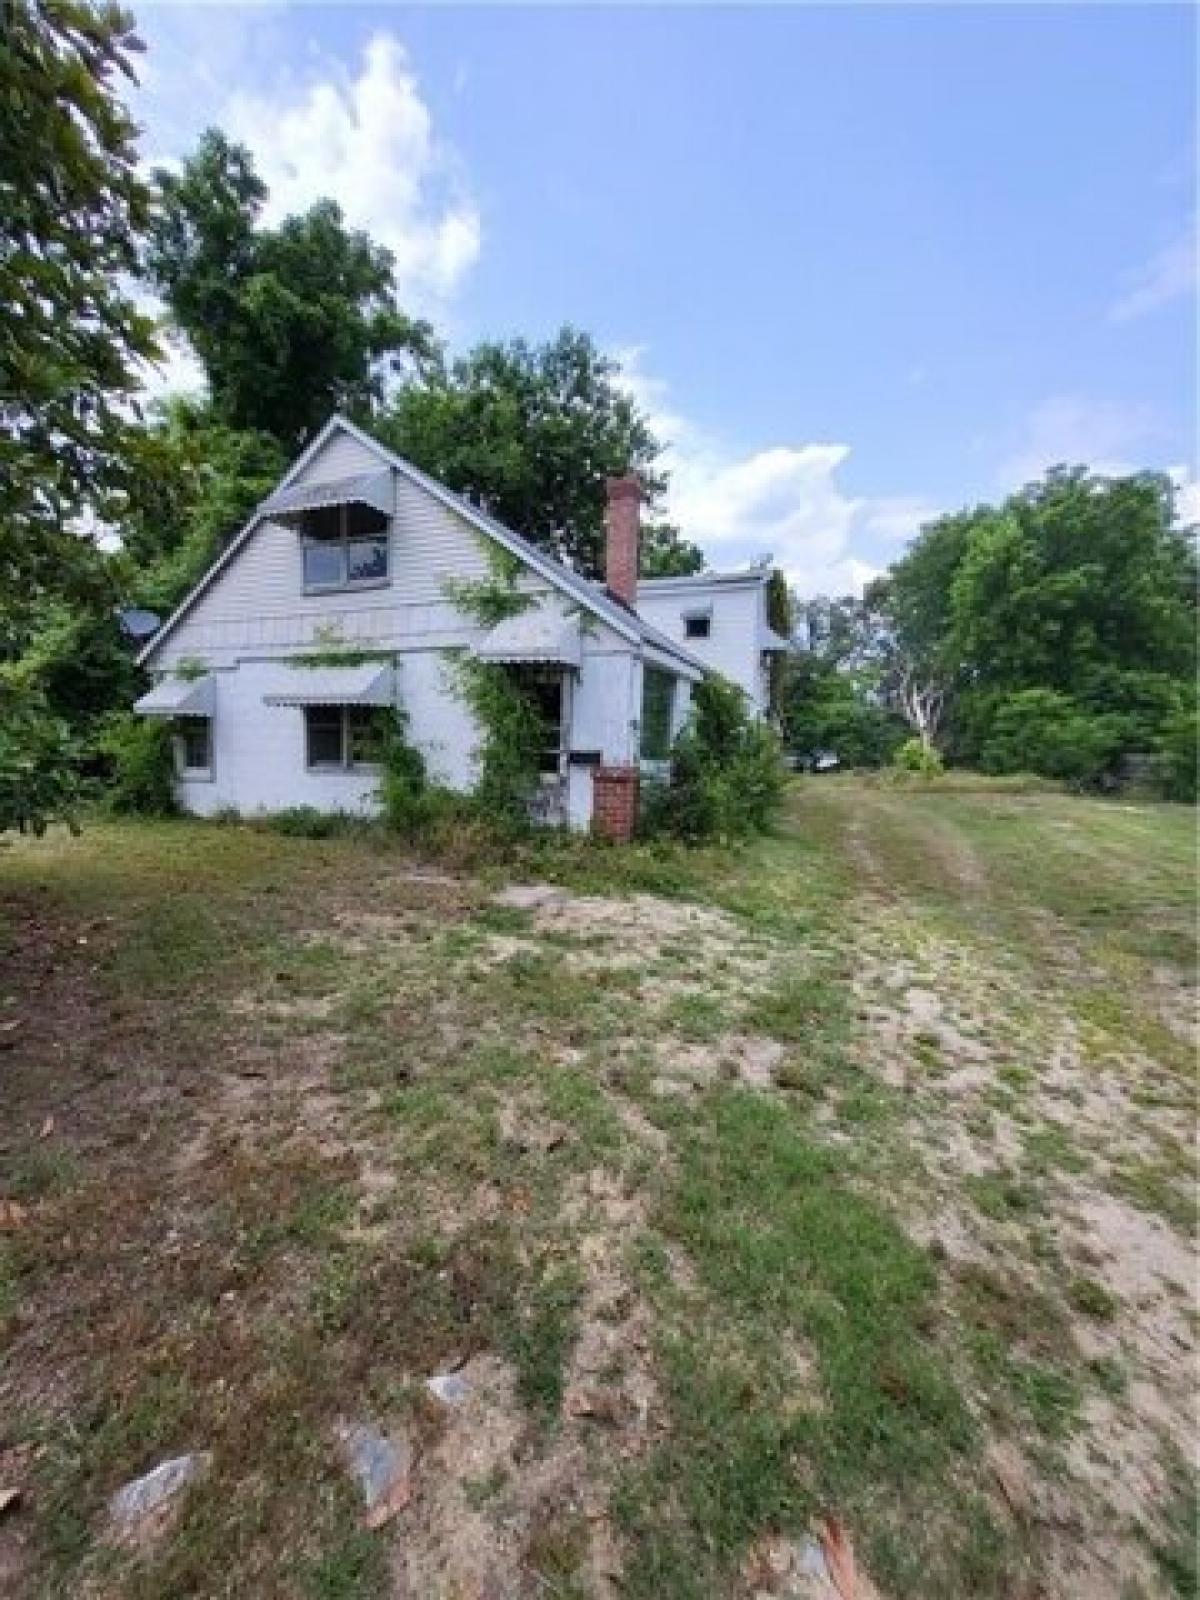 Picture of Home For Sale in Walkerton, Virginia, United States